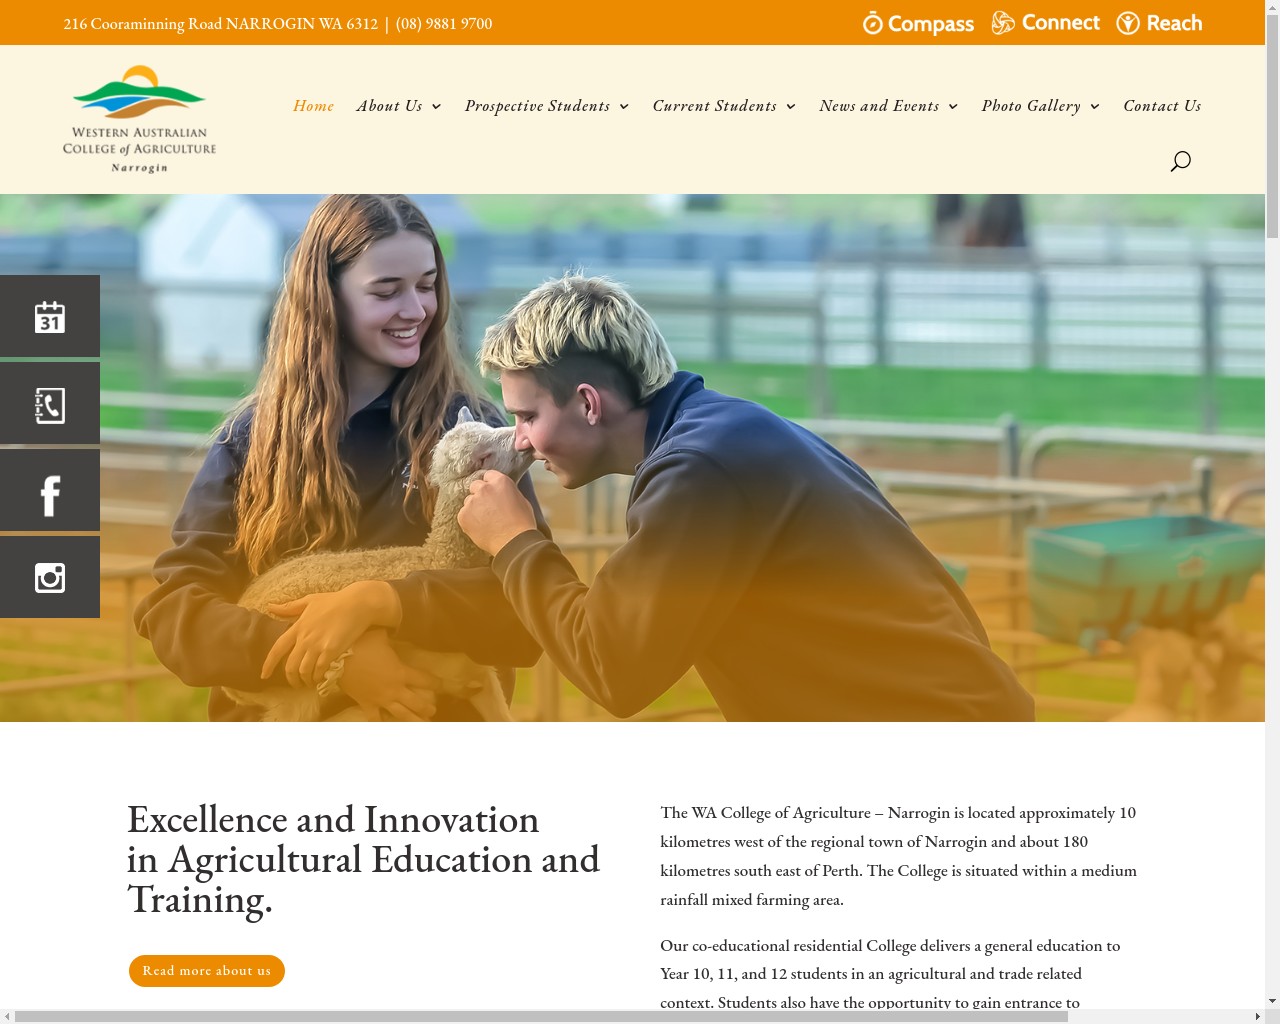 West Australian College of Agriculture